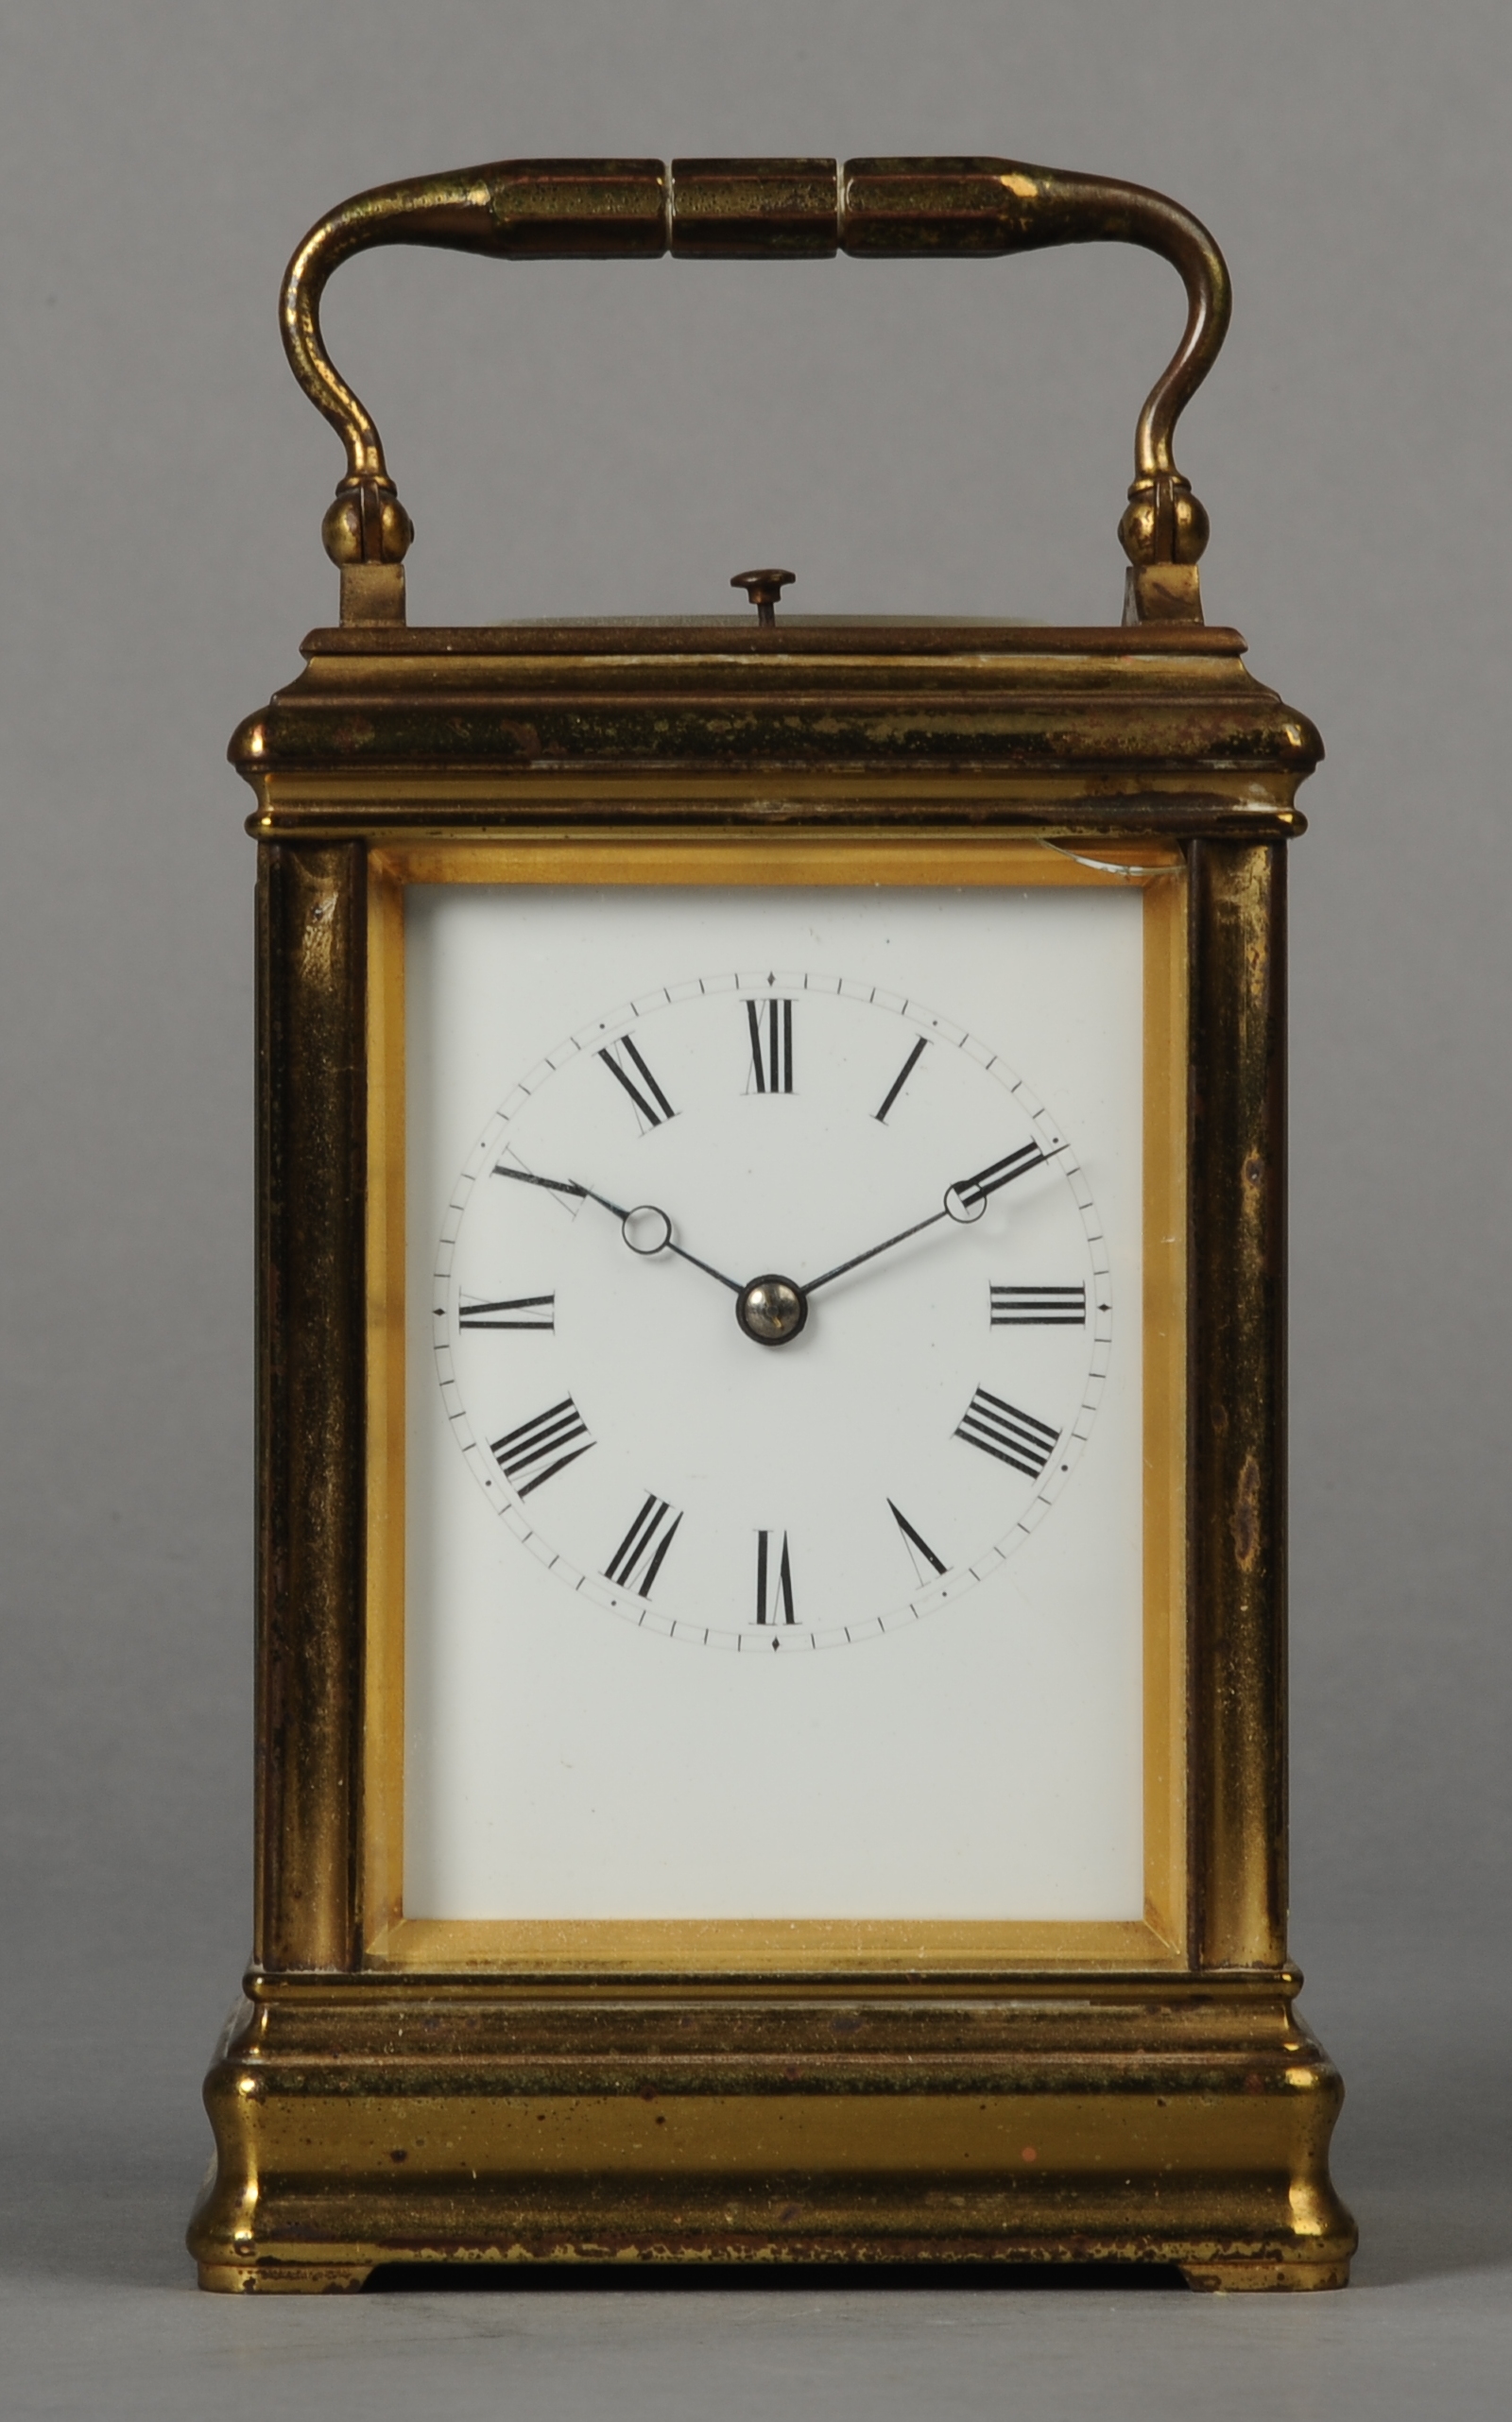 A LATE 19TH CENTURY FRENCH TWO TRAIN CARRIAGE CLOCK WITH ALARUM MOVEMENT,